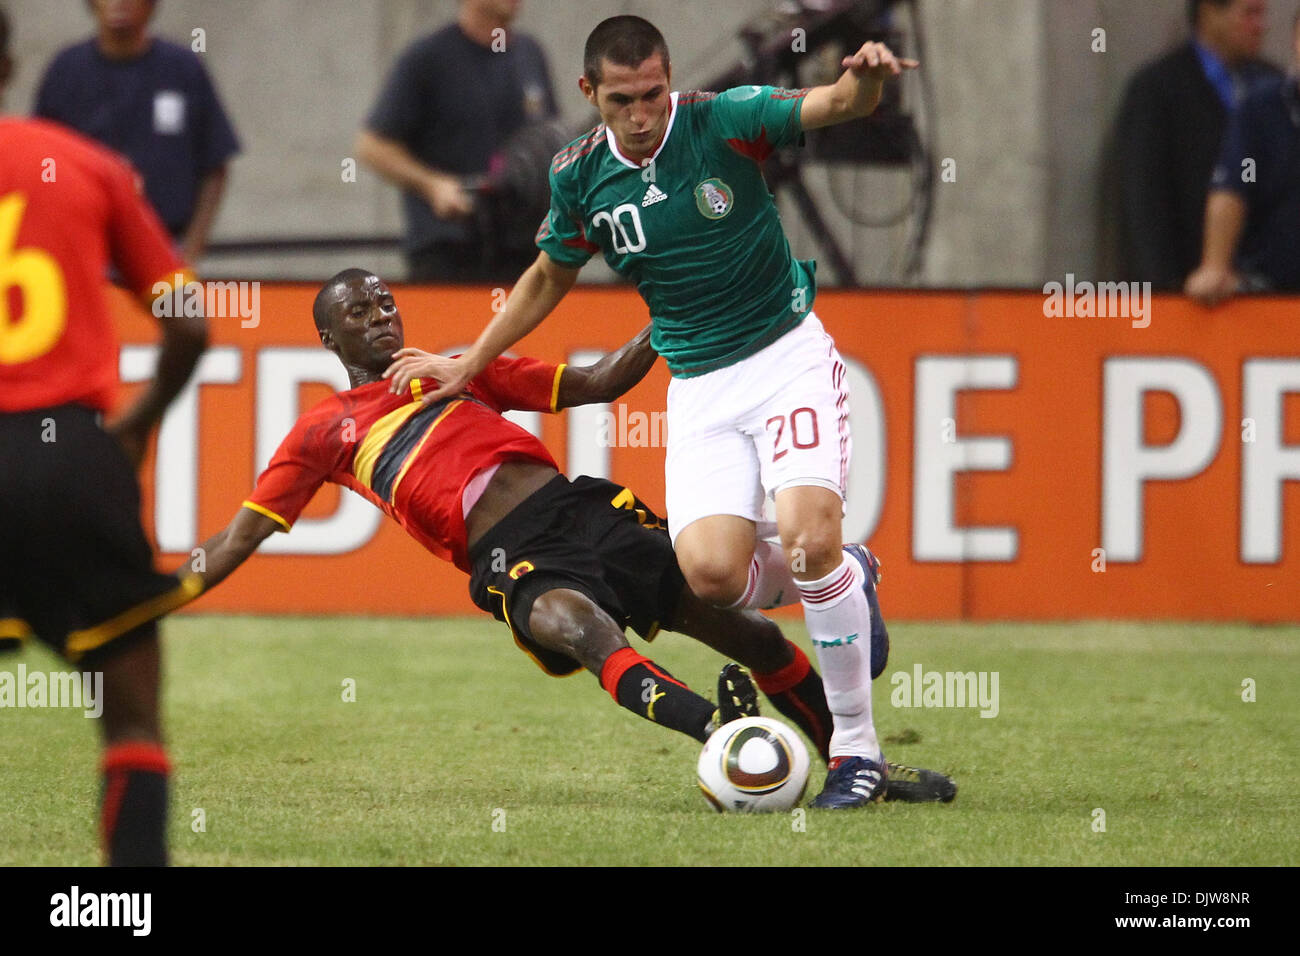 Jorge Torres Nilo (#20) Defender for Mexico pushes Gomito (#3) Defender for Angola off the ball deep in Angola territory.  Mexico defeated Angola 1-0 at Reliant Stadium in Houston, TX. (Credit Image: © Anthony Vasser/Southcreek Global/ZUMApress.com) Stock Photo